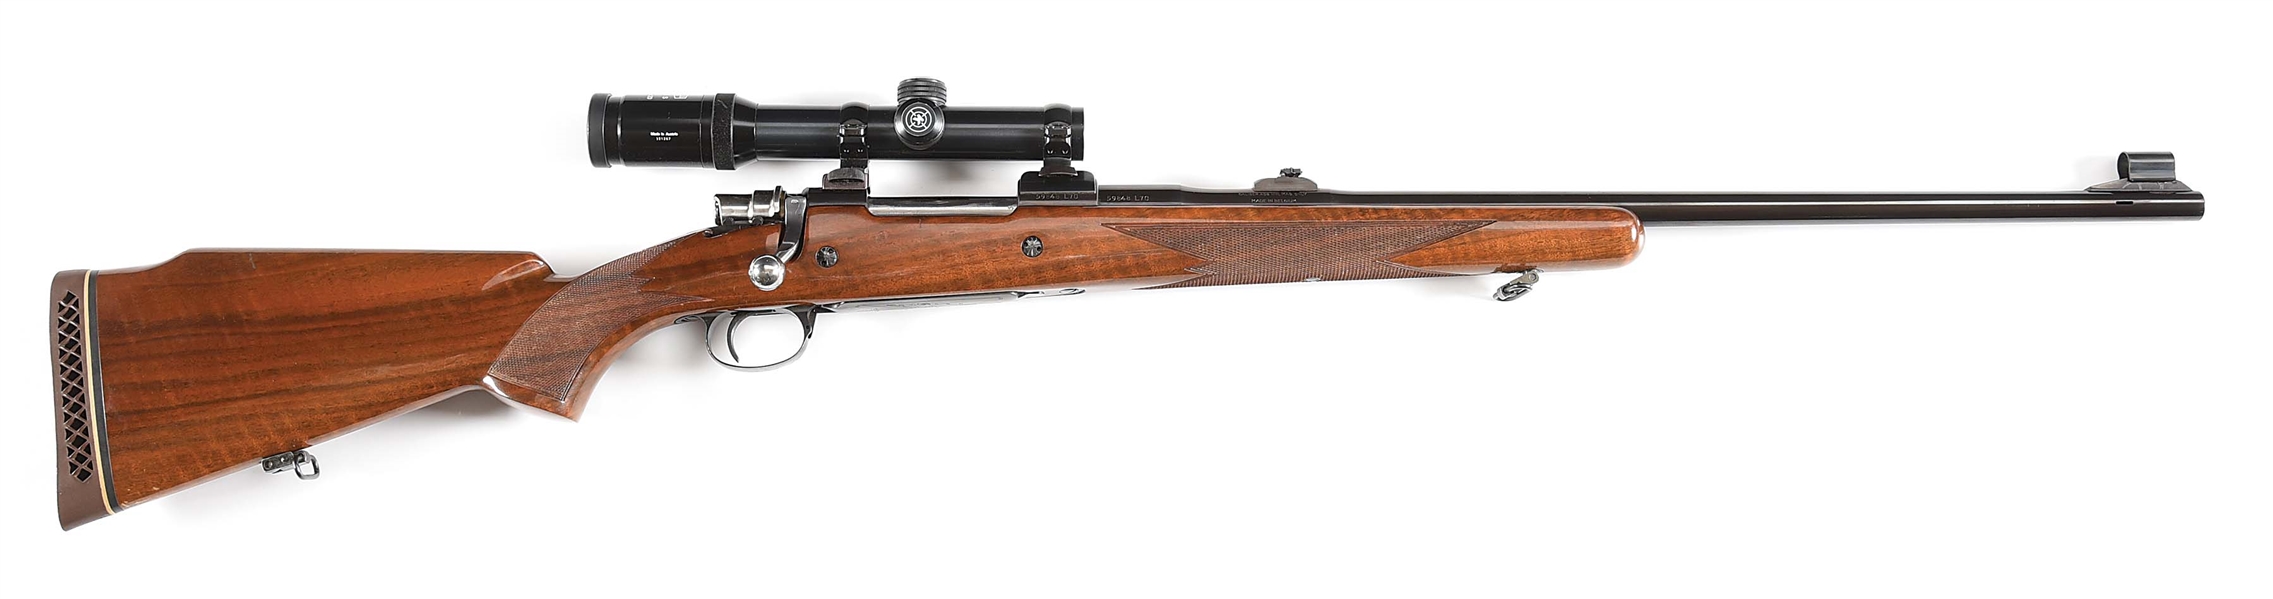 (M) BROWNING HIGH POWER BOLT ACTION RIFLE IN .458 WINCHESTER MAGNUM.